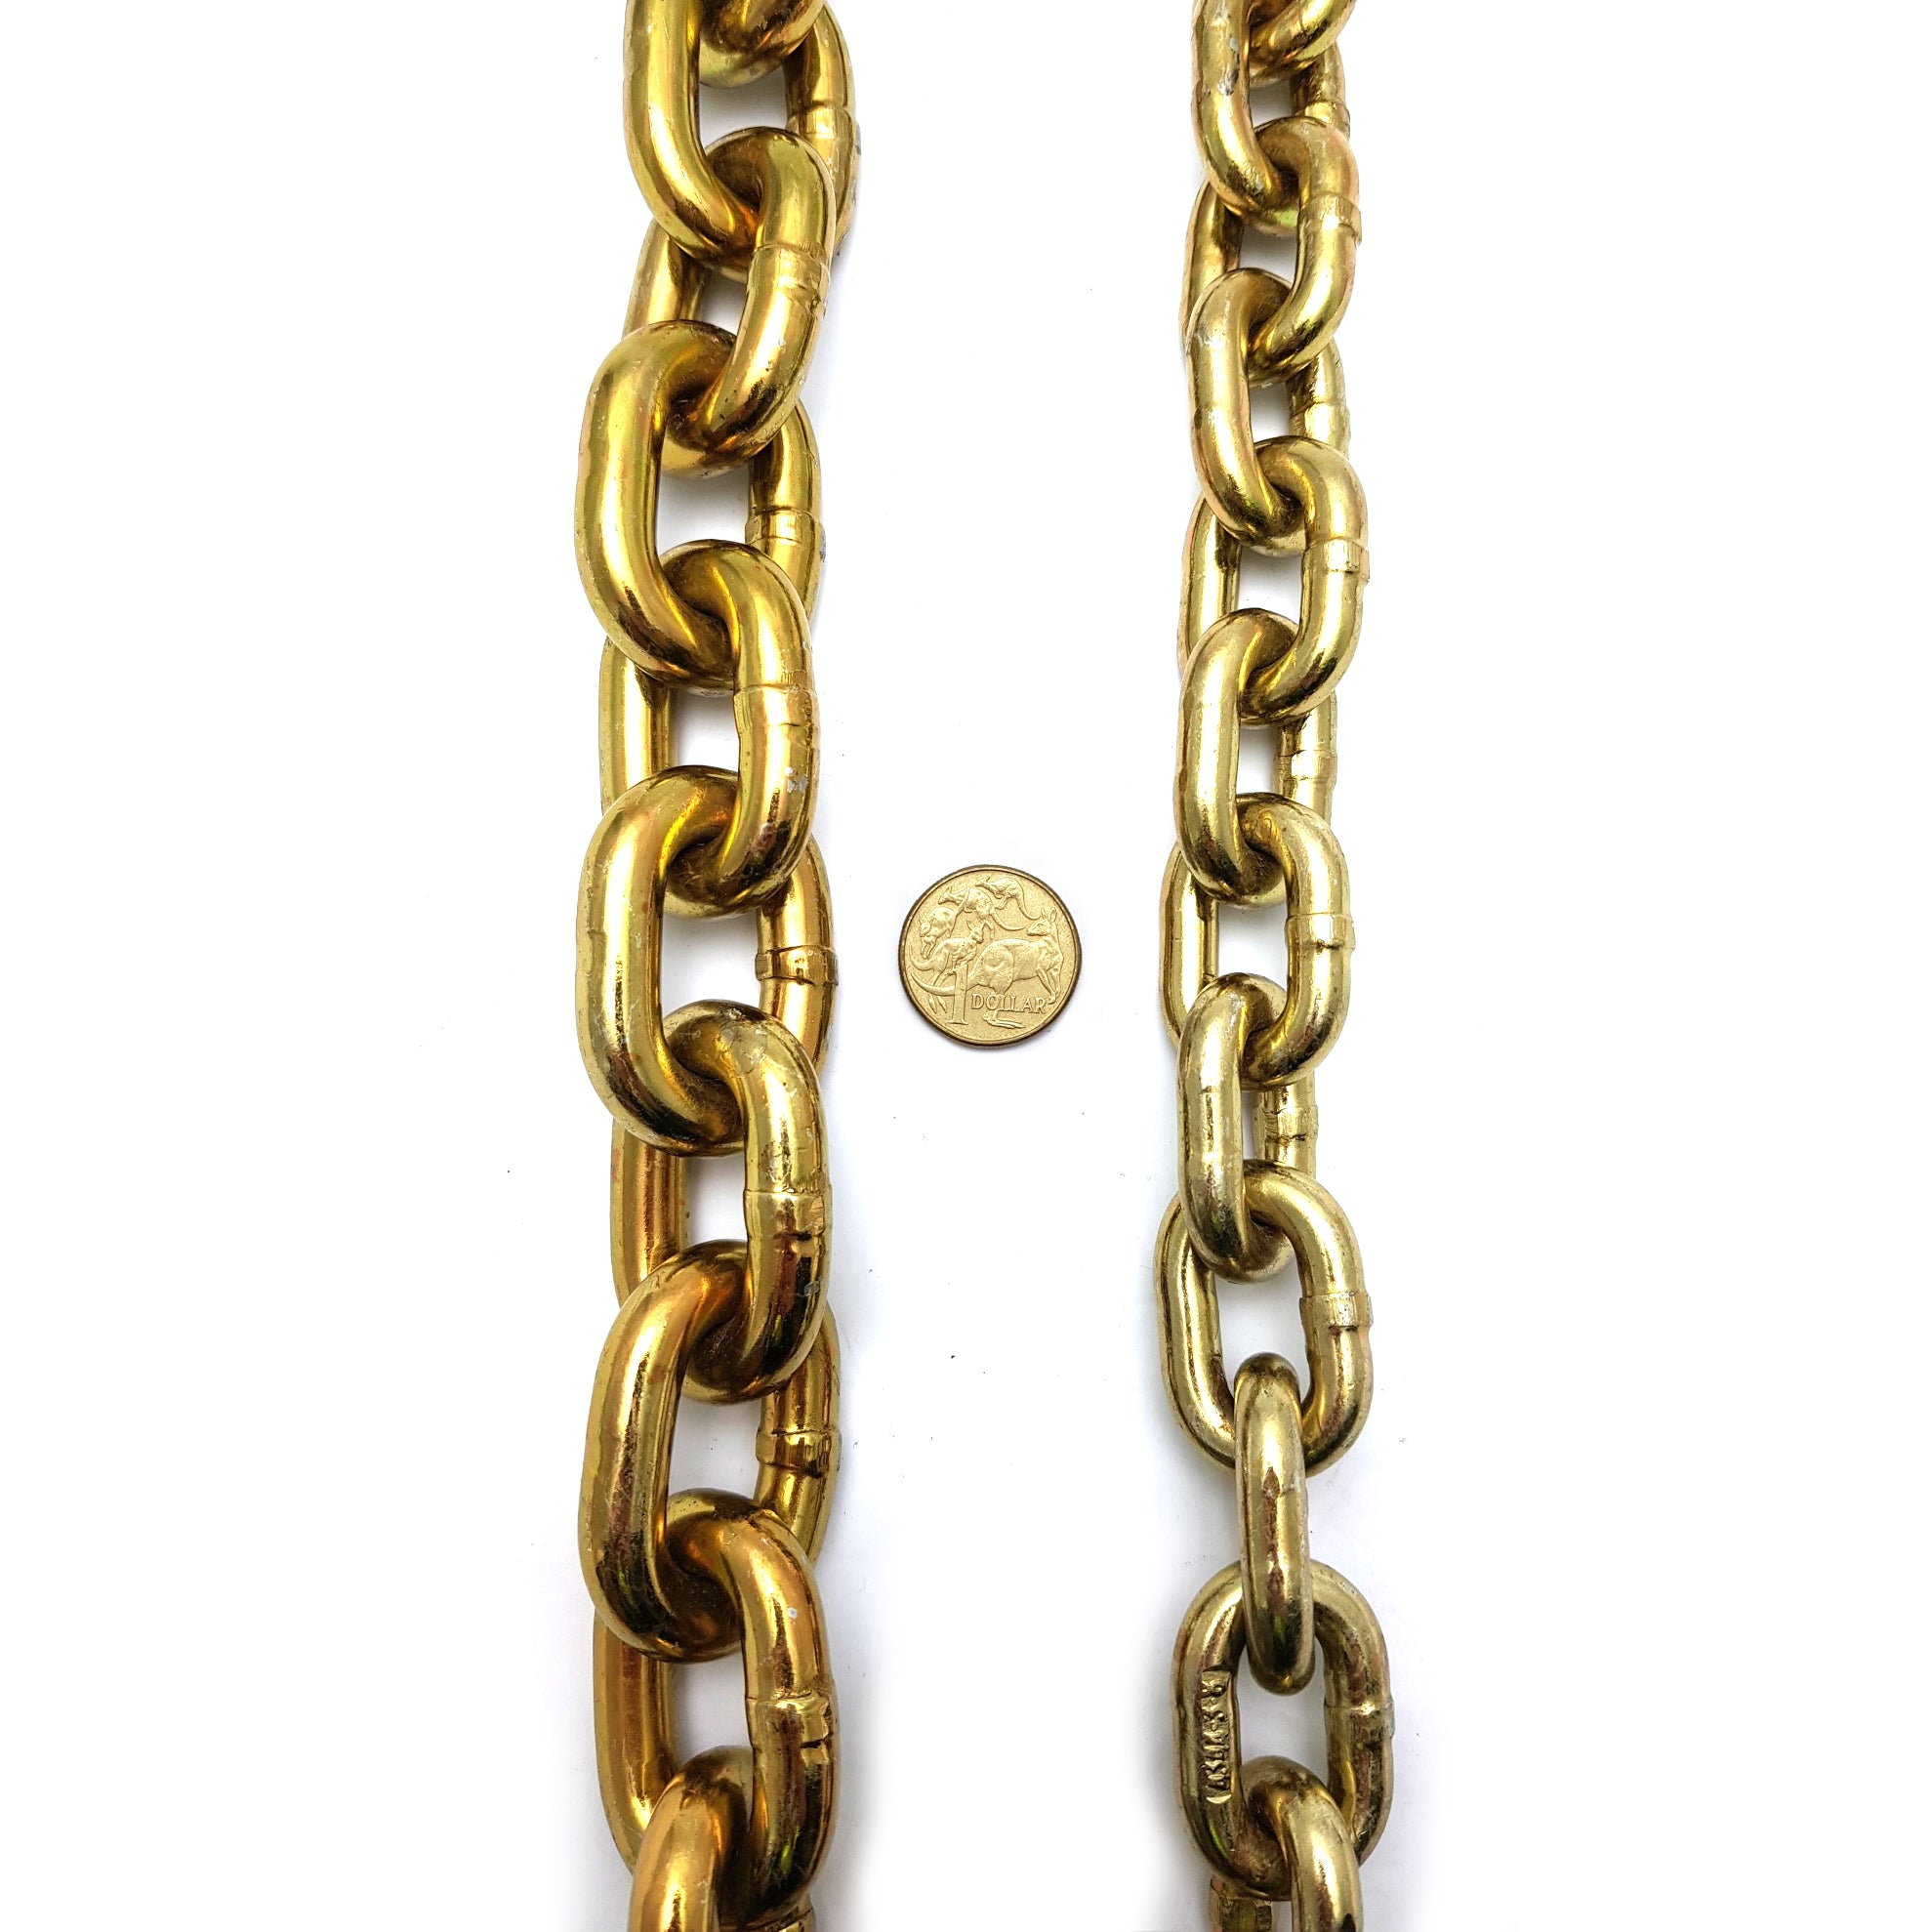 Hardened security chain, size: 10mm & 8mm x 50cm long. Melbourne, Australia.